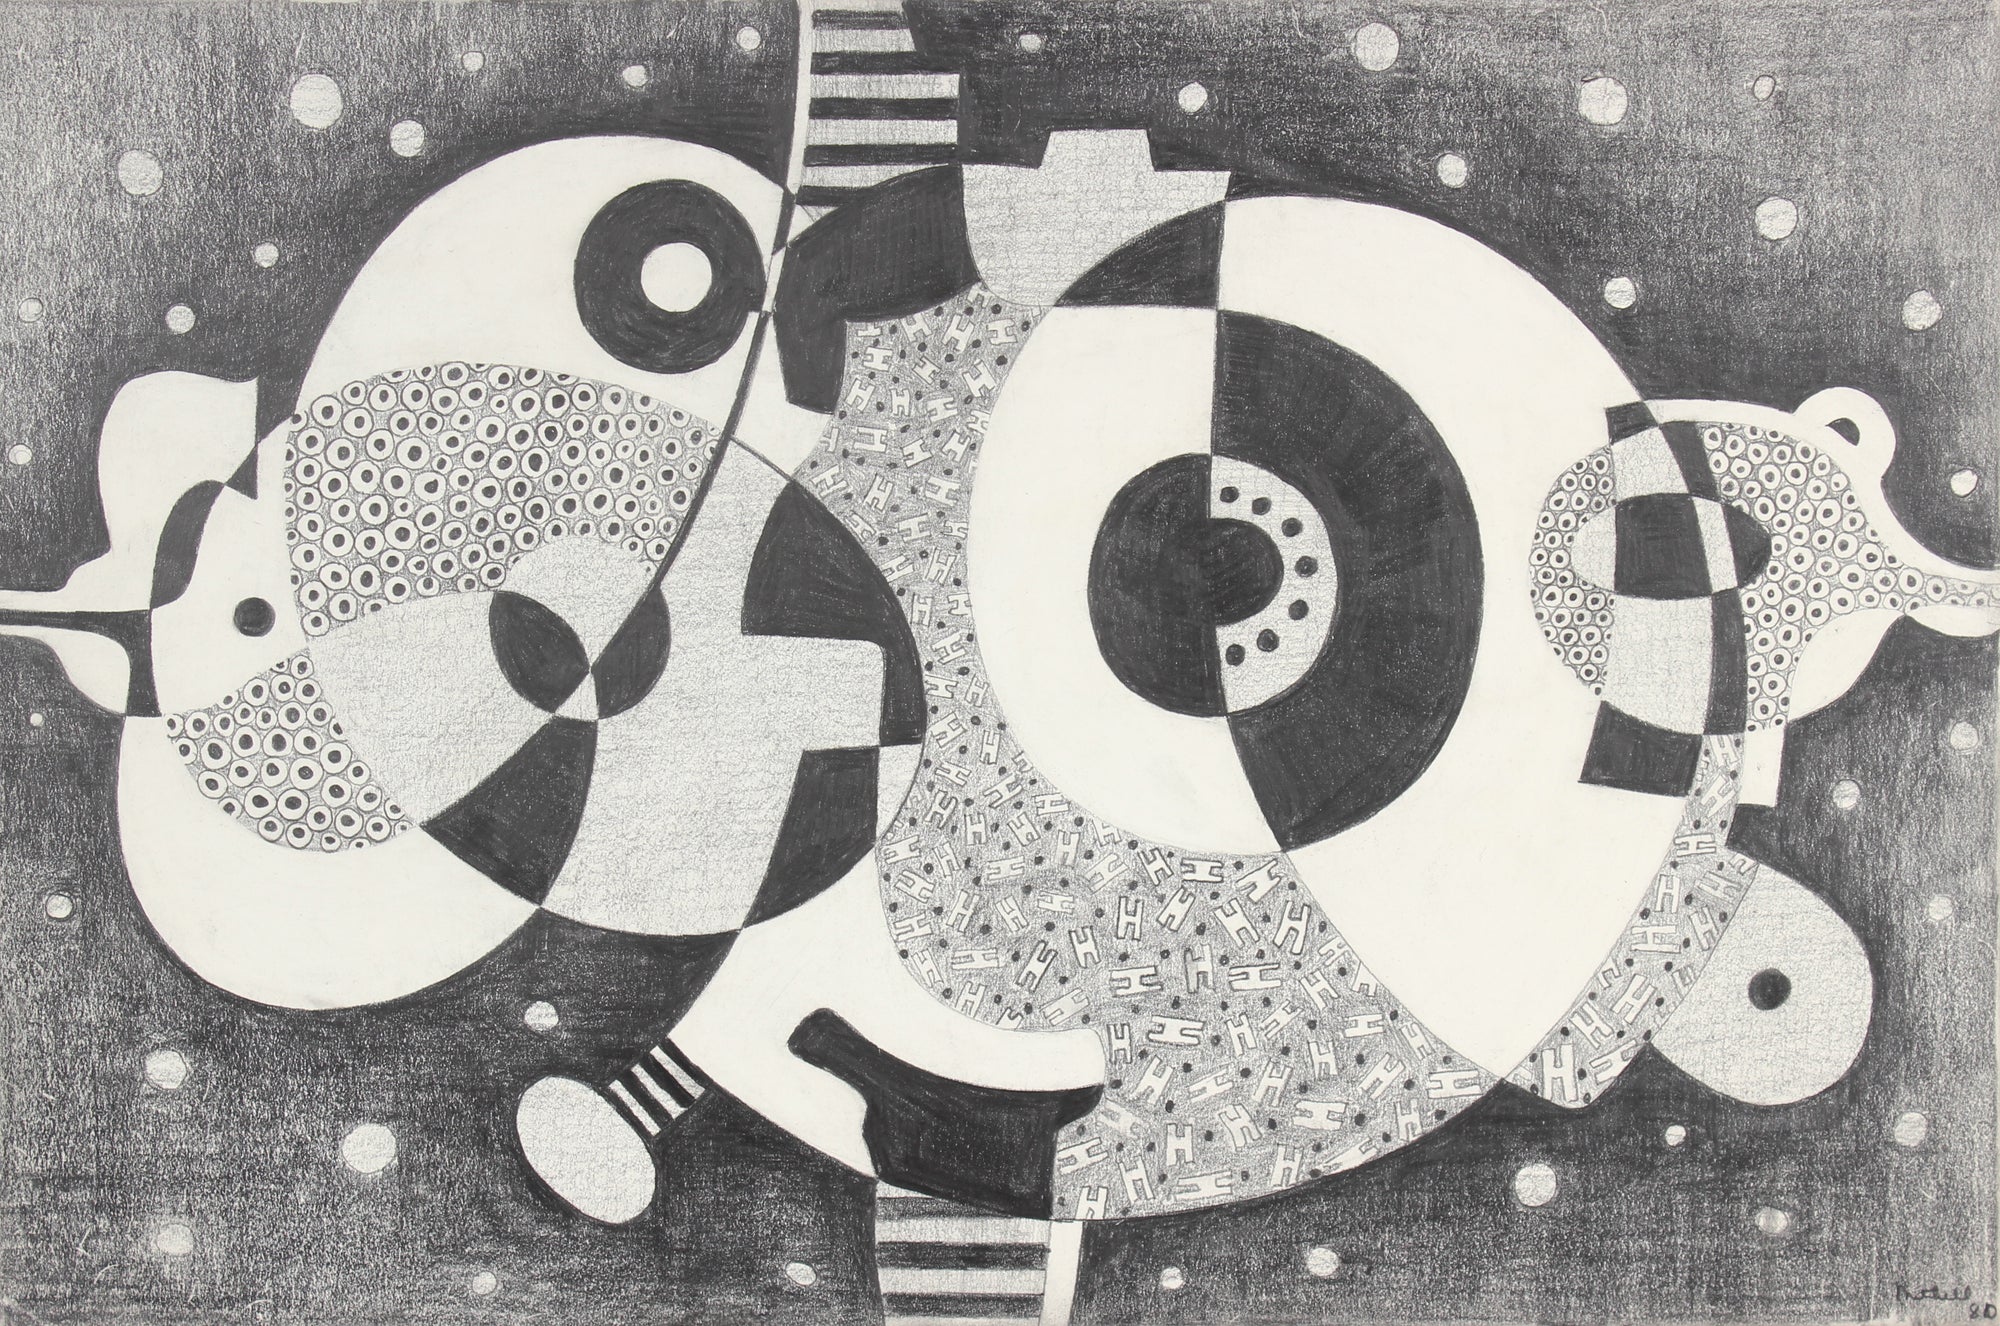 Abstract Patterned Organic Forms <br>1980 Graphite <br><br>#91526